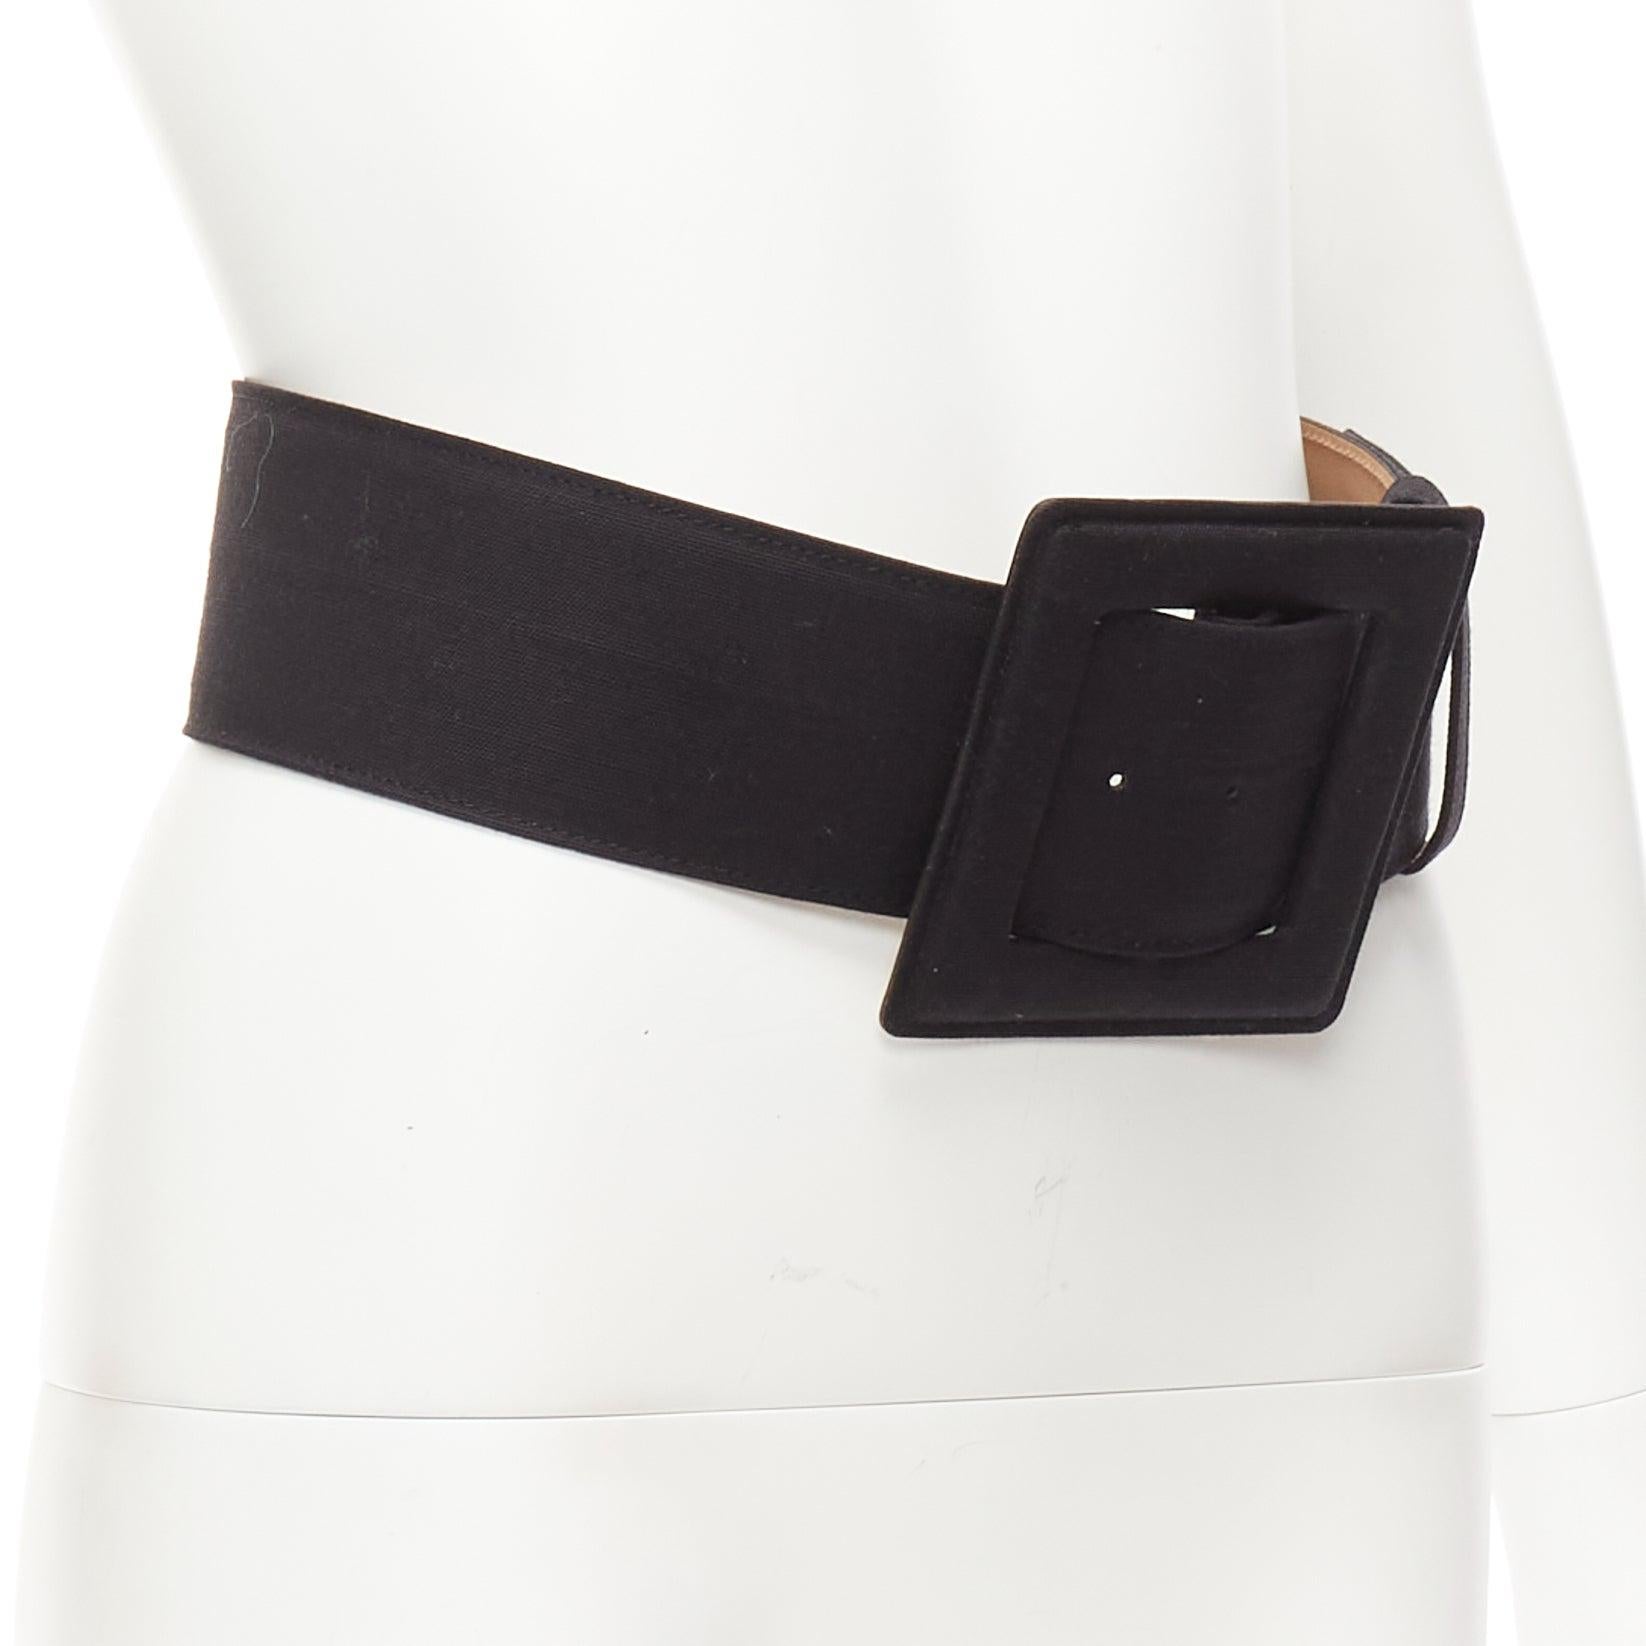 CAROLINA HERRERA black canvas nude leather lining wide big buckle belt S
Reference: AAWC/A01206
Brand: Carolina Herrera
Material: Canvas
Color: Black, Nude
Pattern: Solid
Closure: Belt
Lining: Nude Leather
Made in: Italy

CONDITION:
Condition: